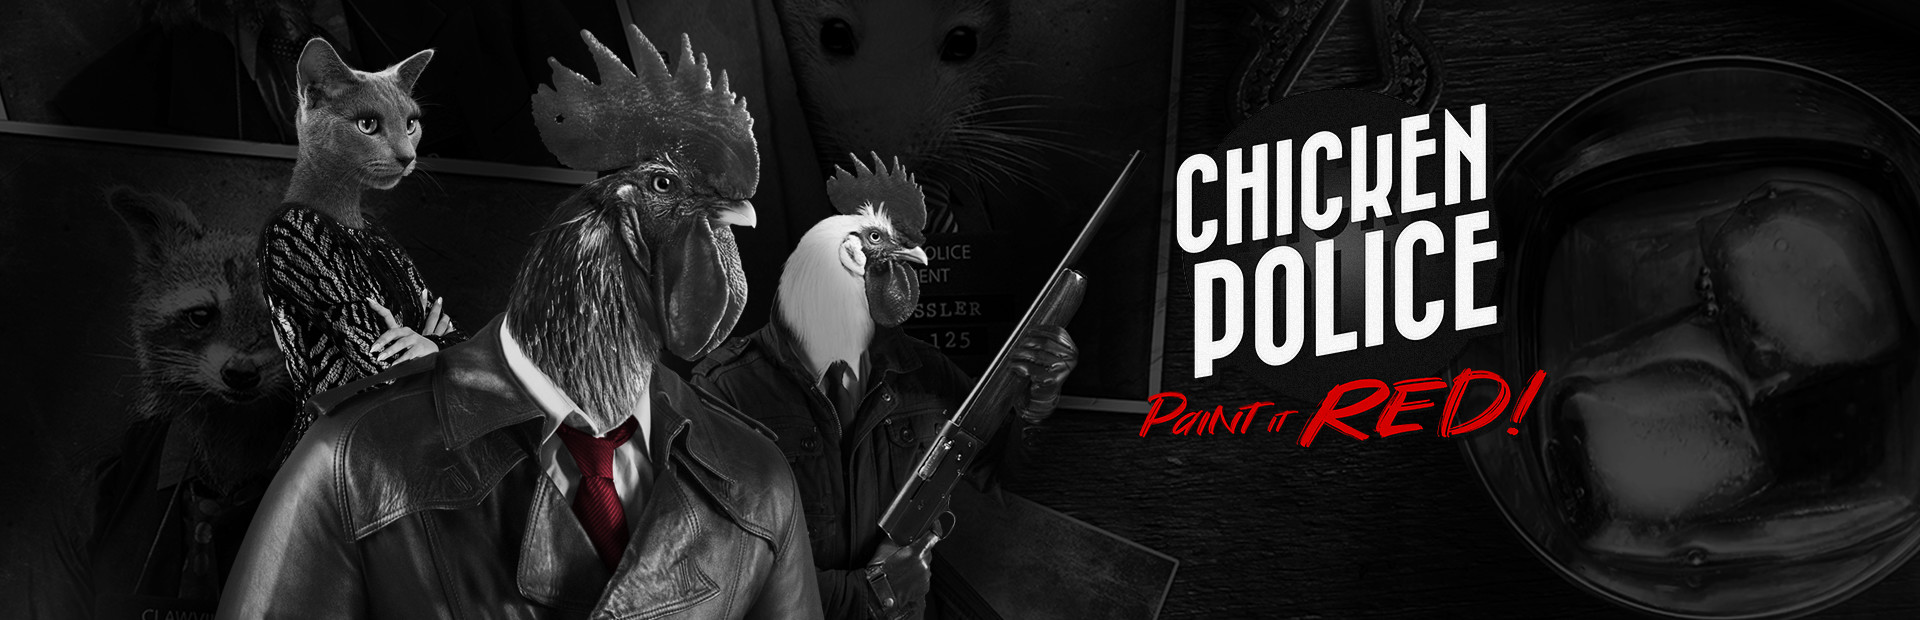 Chicken Police - Paint it RED! cover image